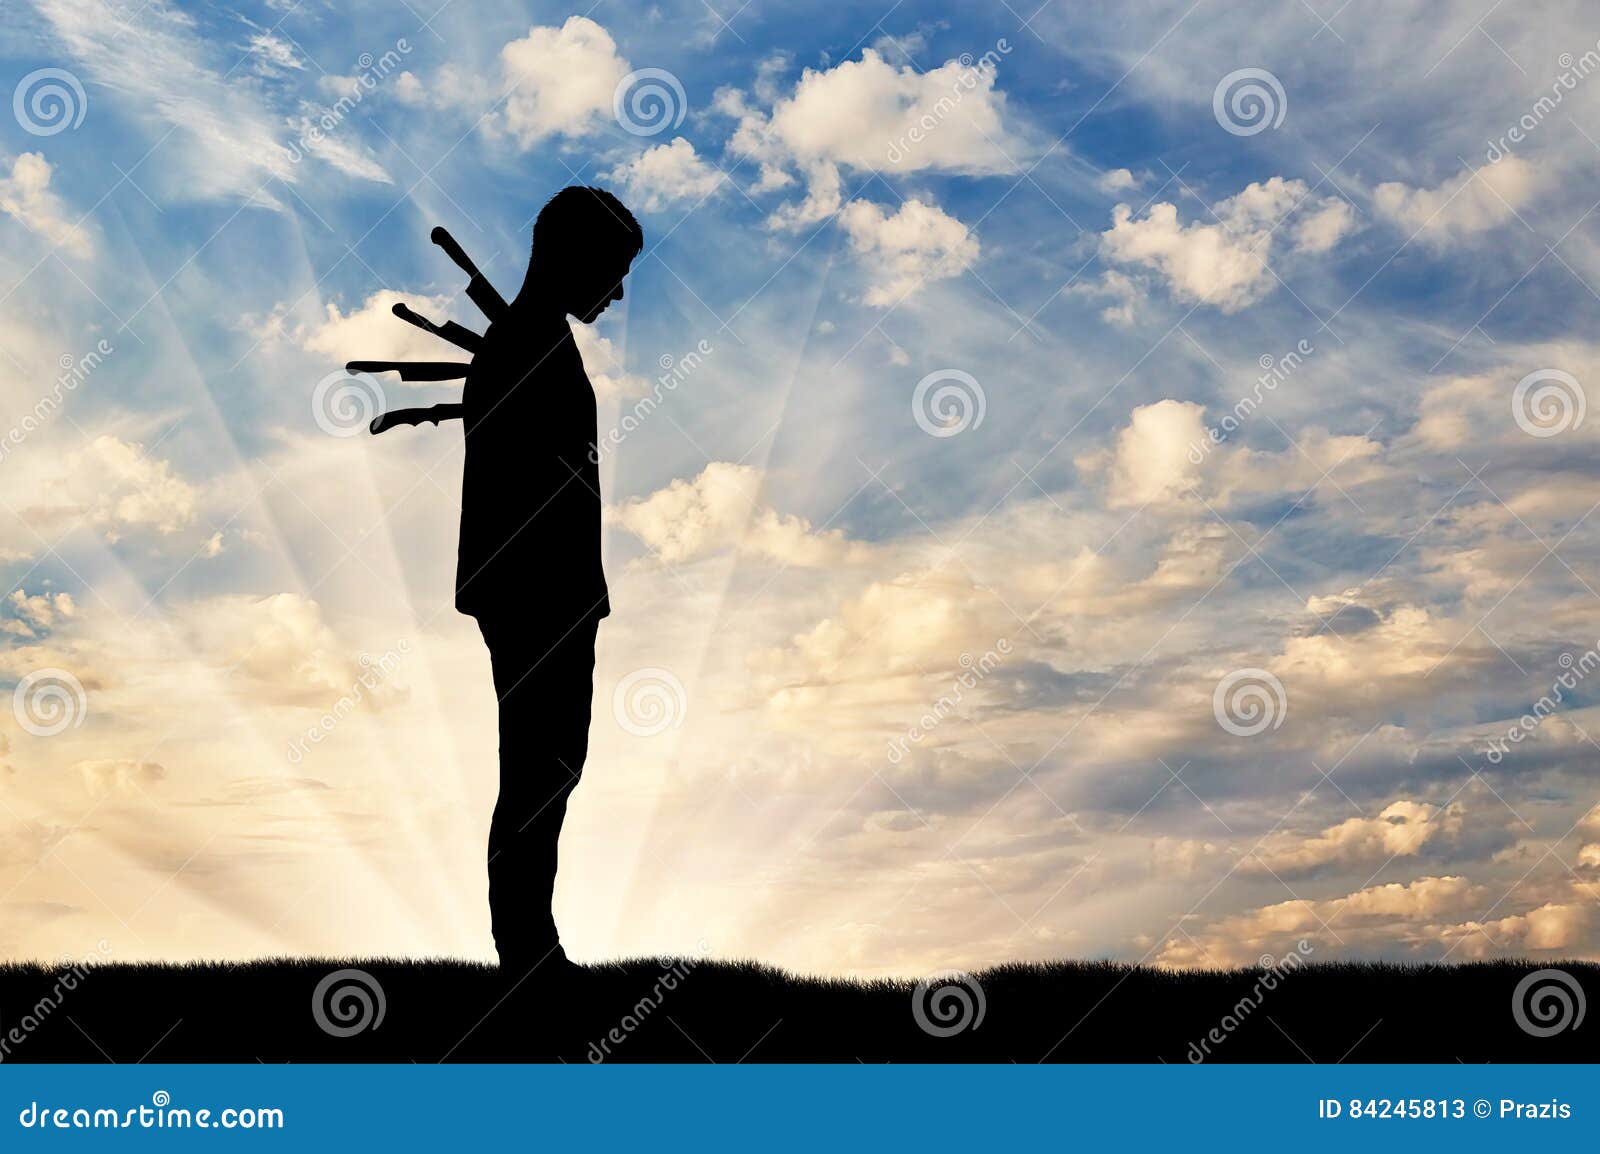 Silhouette of a Sad Man with a Knives in His Back Stock Image ...